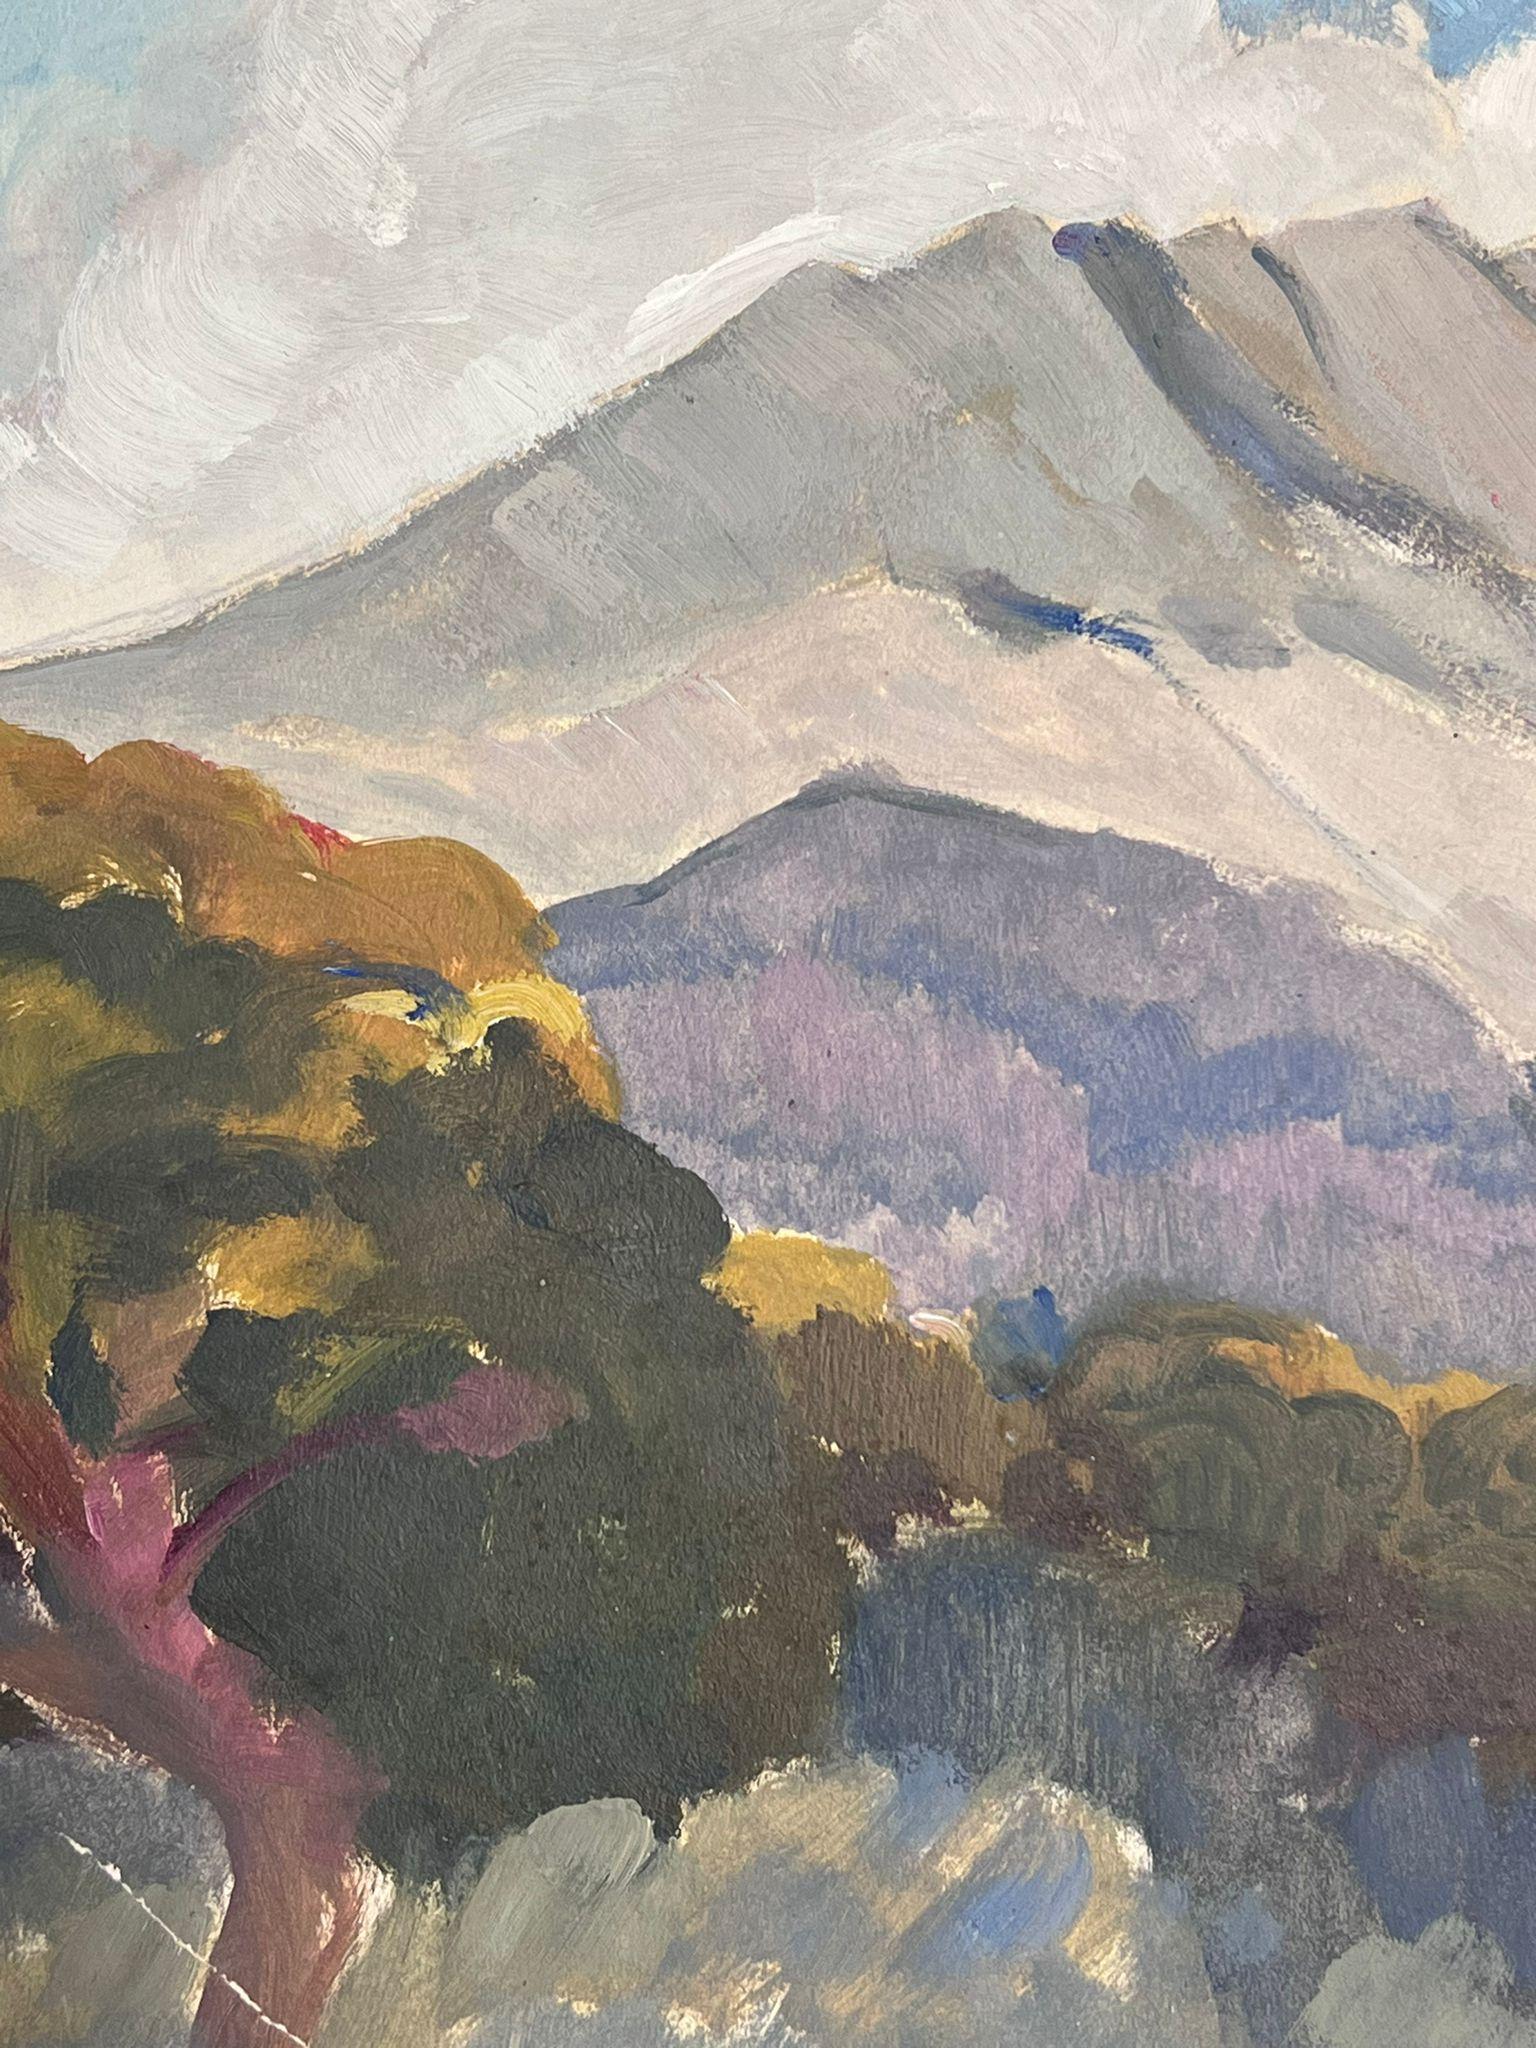 Mountain Landscape
by Louise Alix, French 1950's Impressionist 
gouache on artist paper, unframed
painting: 8.5 x 10.5 inches
provenance: from a large private collection of this artists work in Northern France
condition: original, good and sound